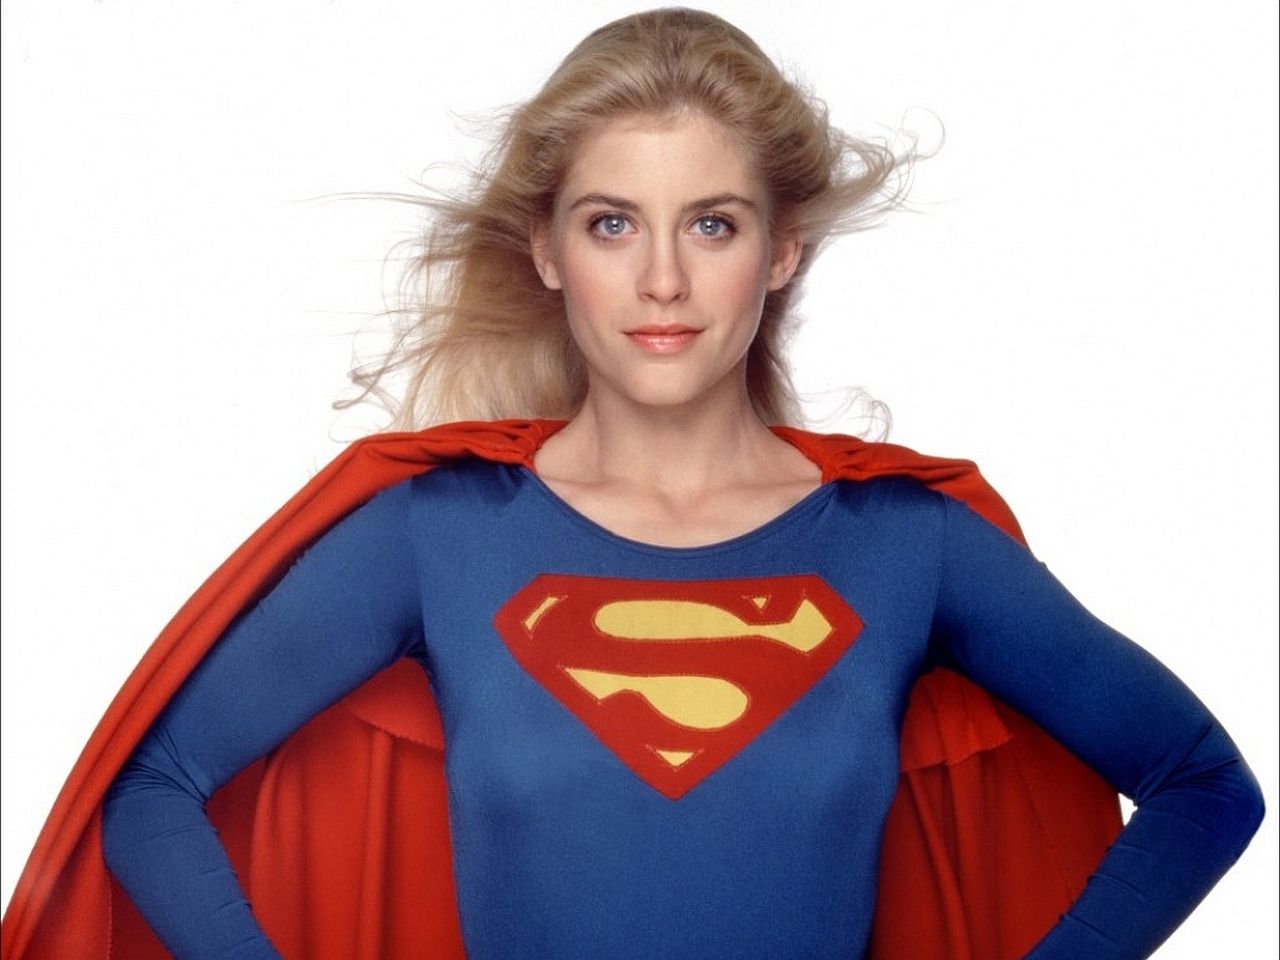 Helen Slater and Dean Cain will star in ‘Supergirl’ TV Series